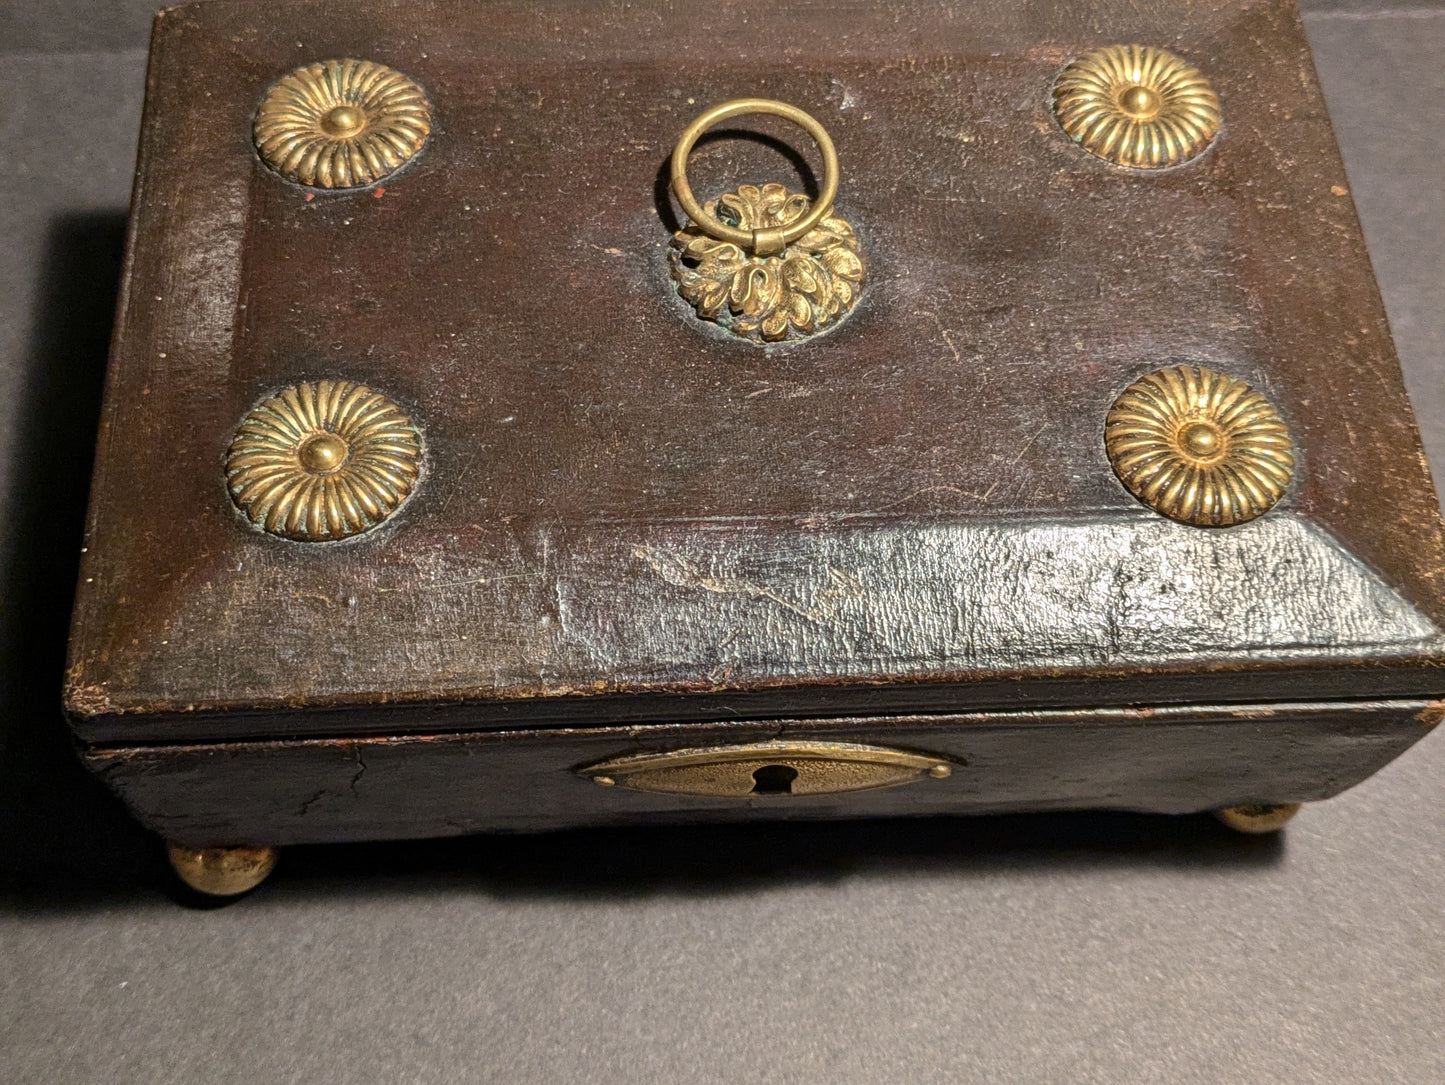 Brown wood jewelry box with gold adornment